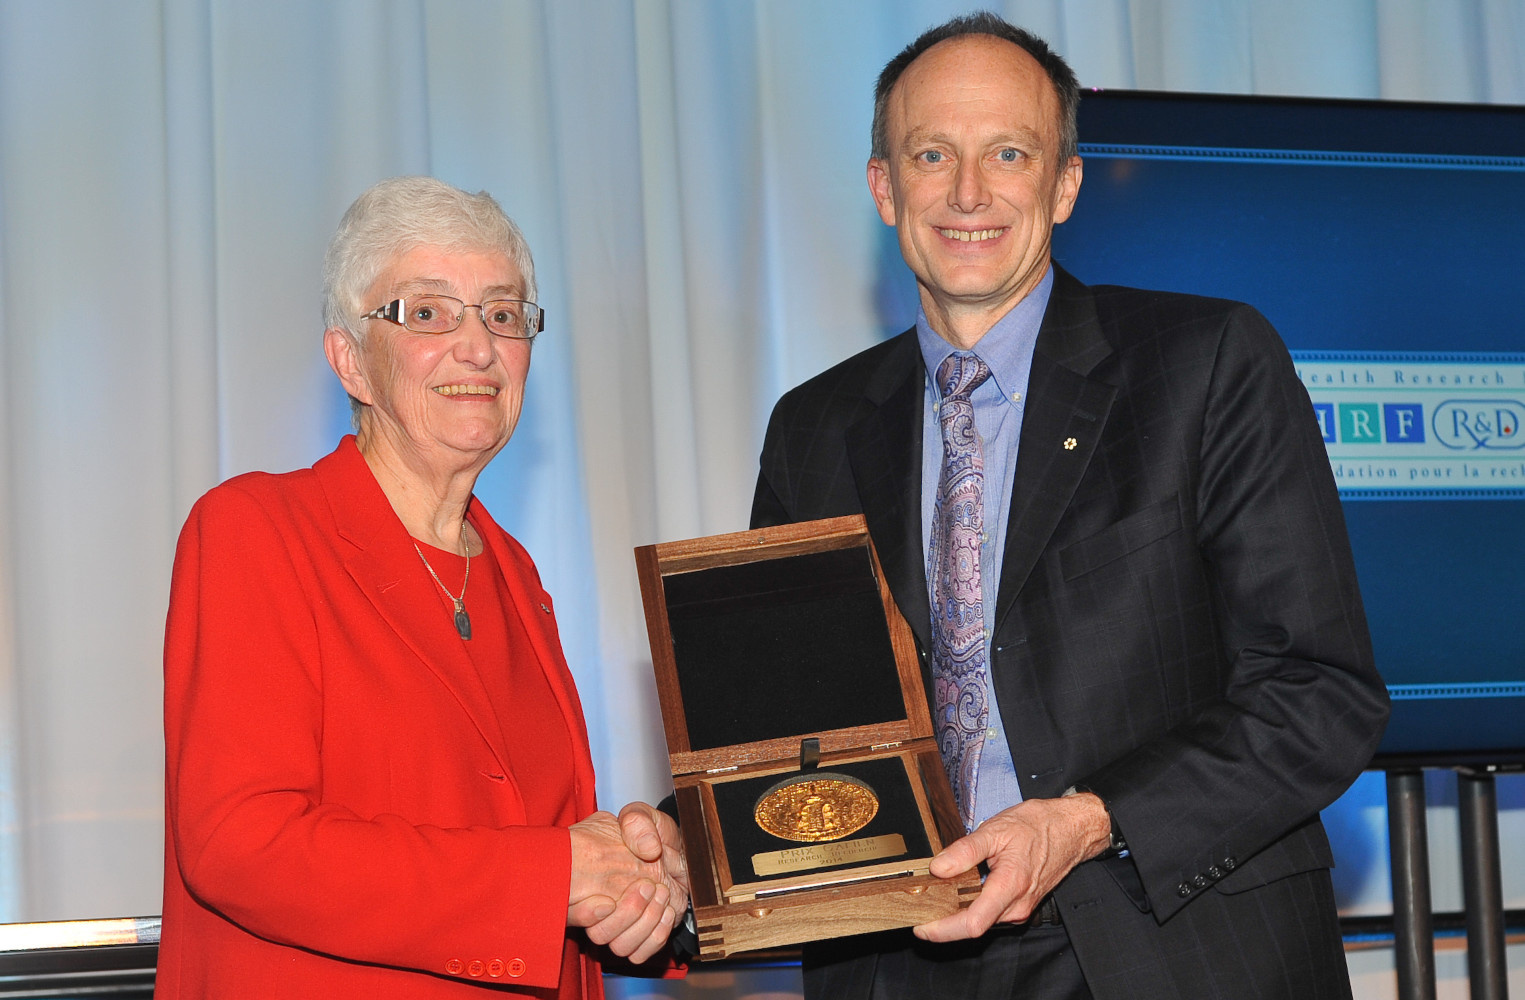 2014 - Dr. Brett Finlay accepting the Prix Galien Canada Research Award from Dr. Jean Gray